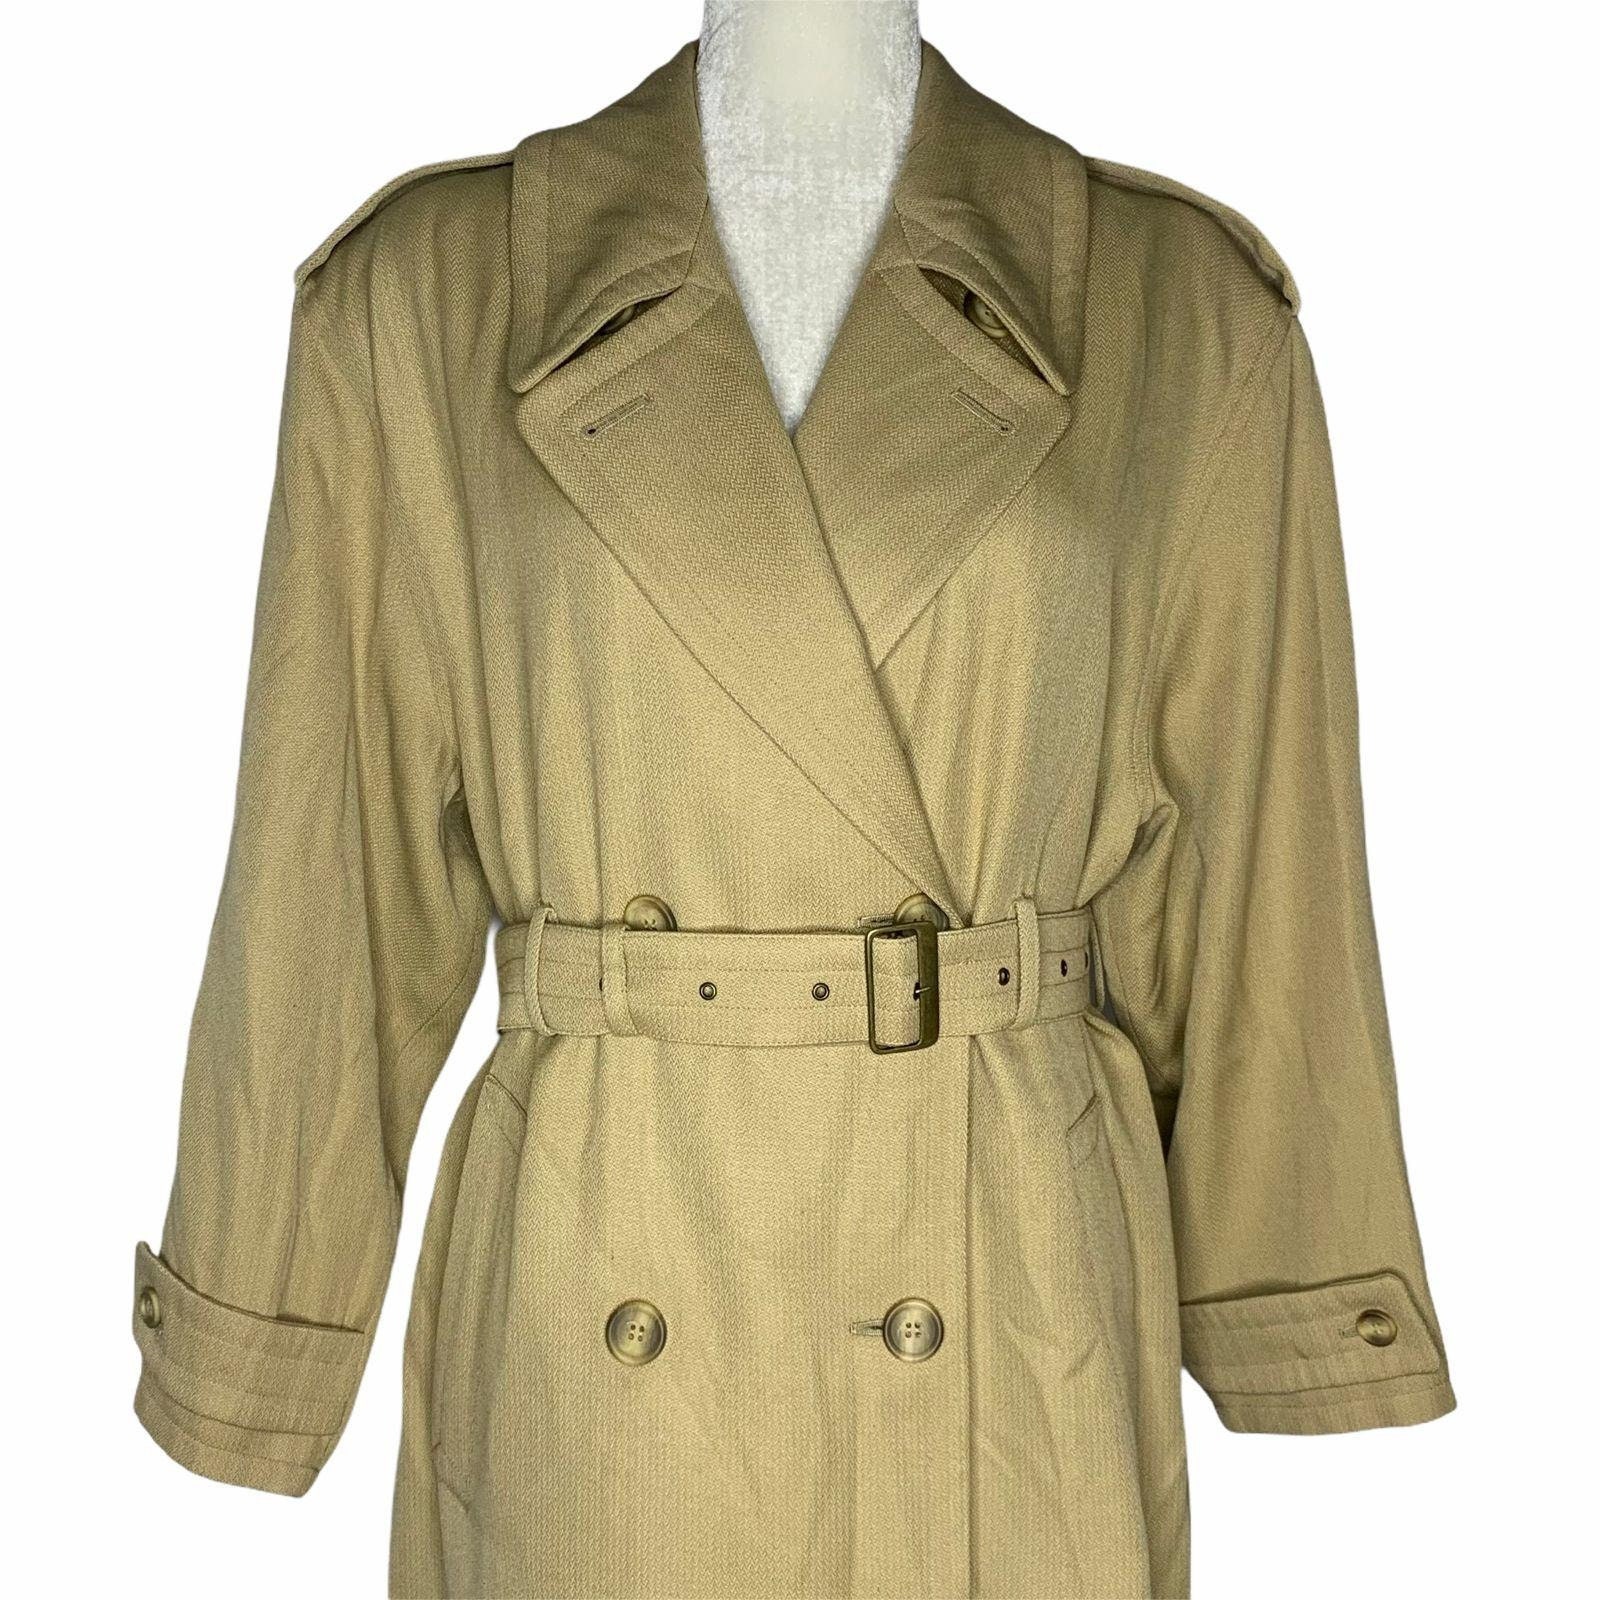 Vintage Giorgio Armani Trench Coat 40 Tan Beige Wool Belted - Etsy UK